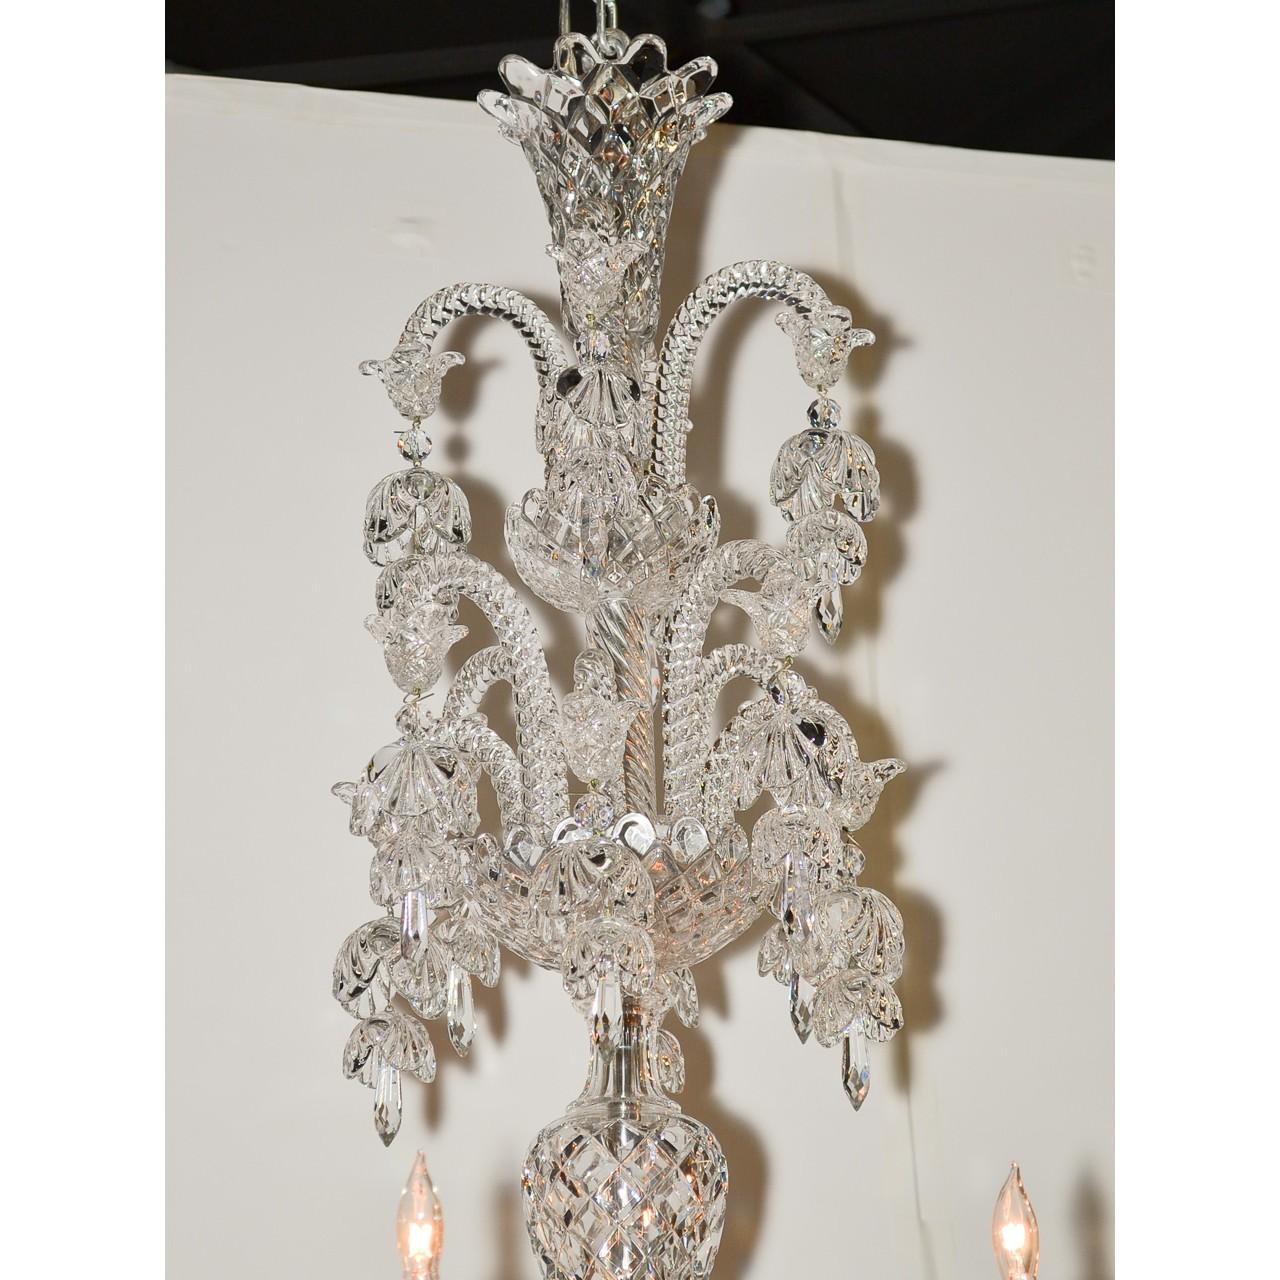 French Signed Baccarat Cut Crystal Chandelier, circa 1900